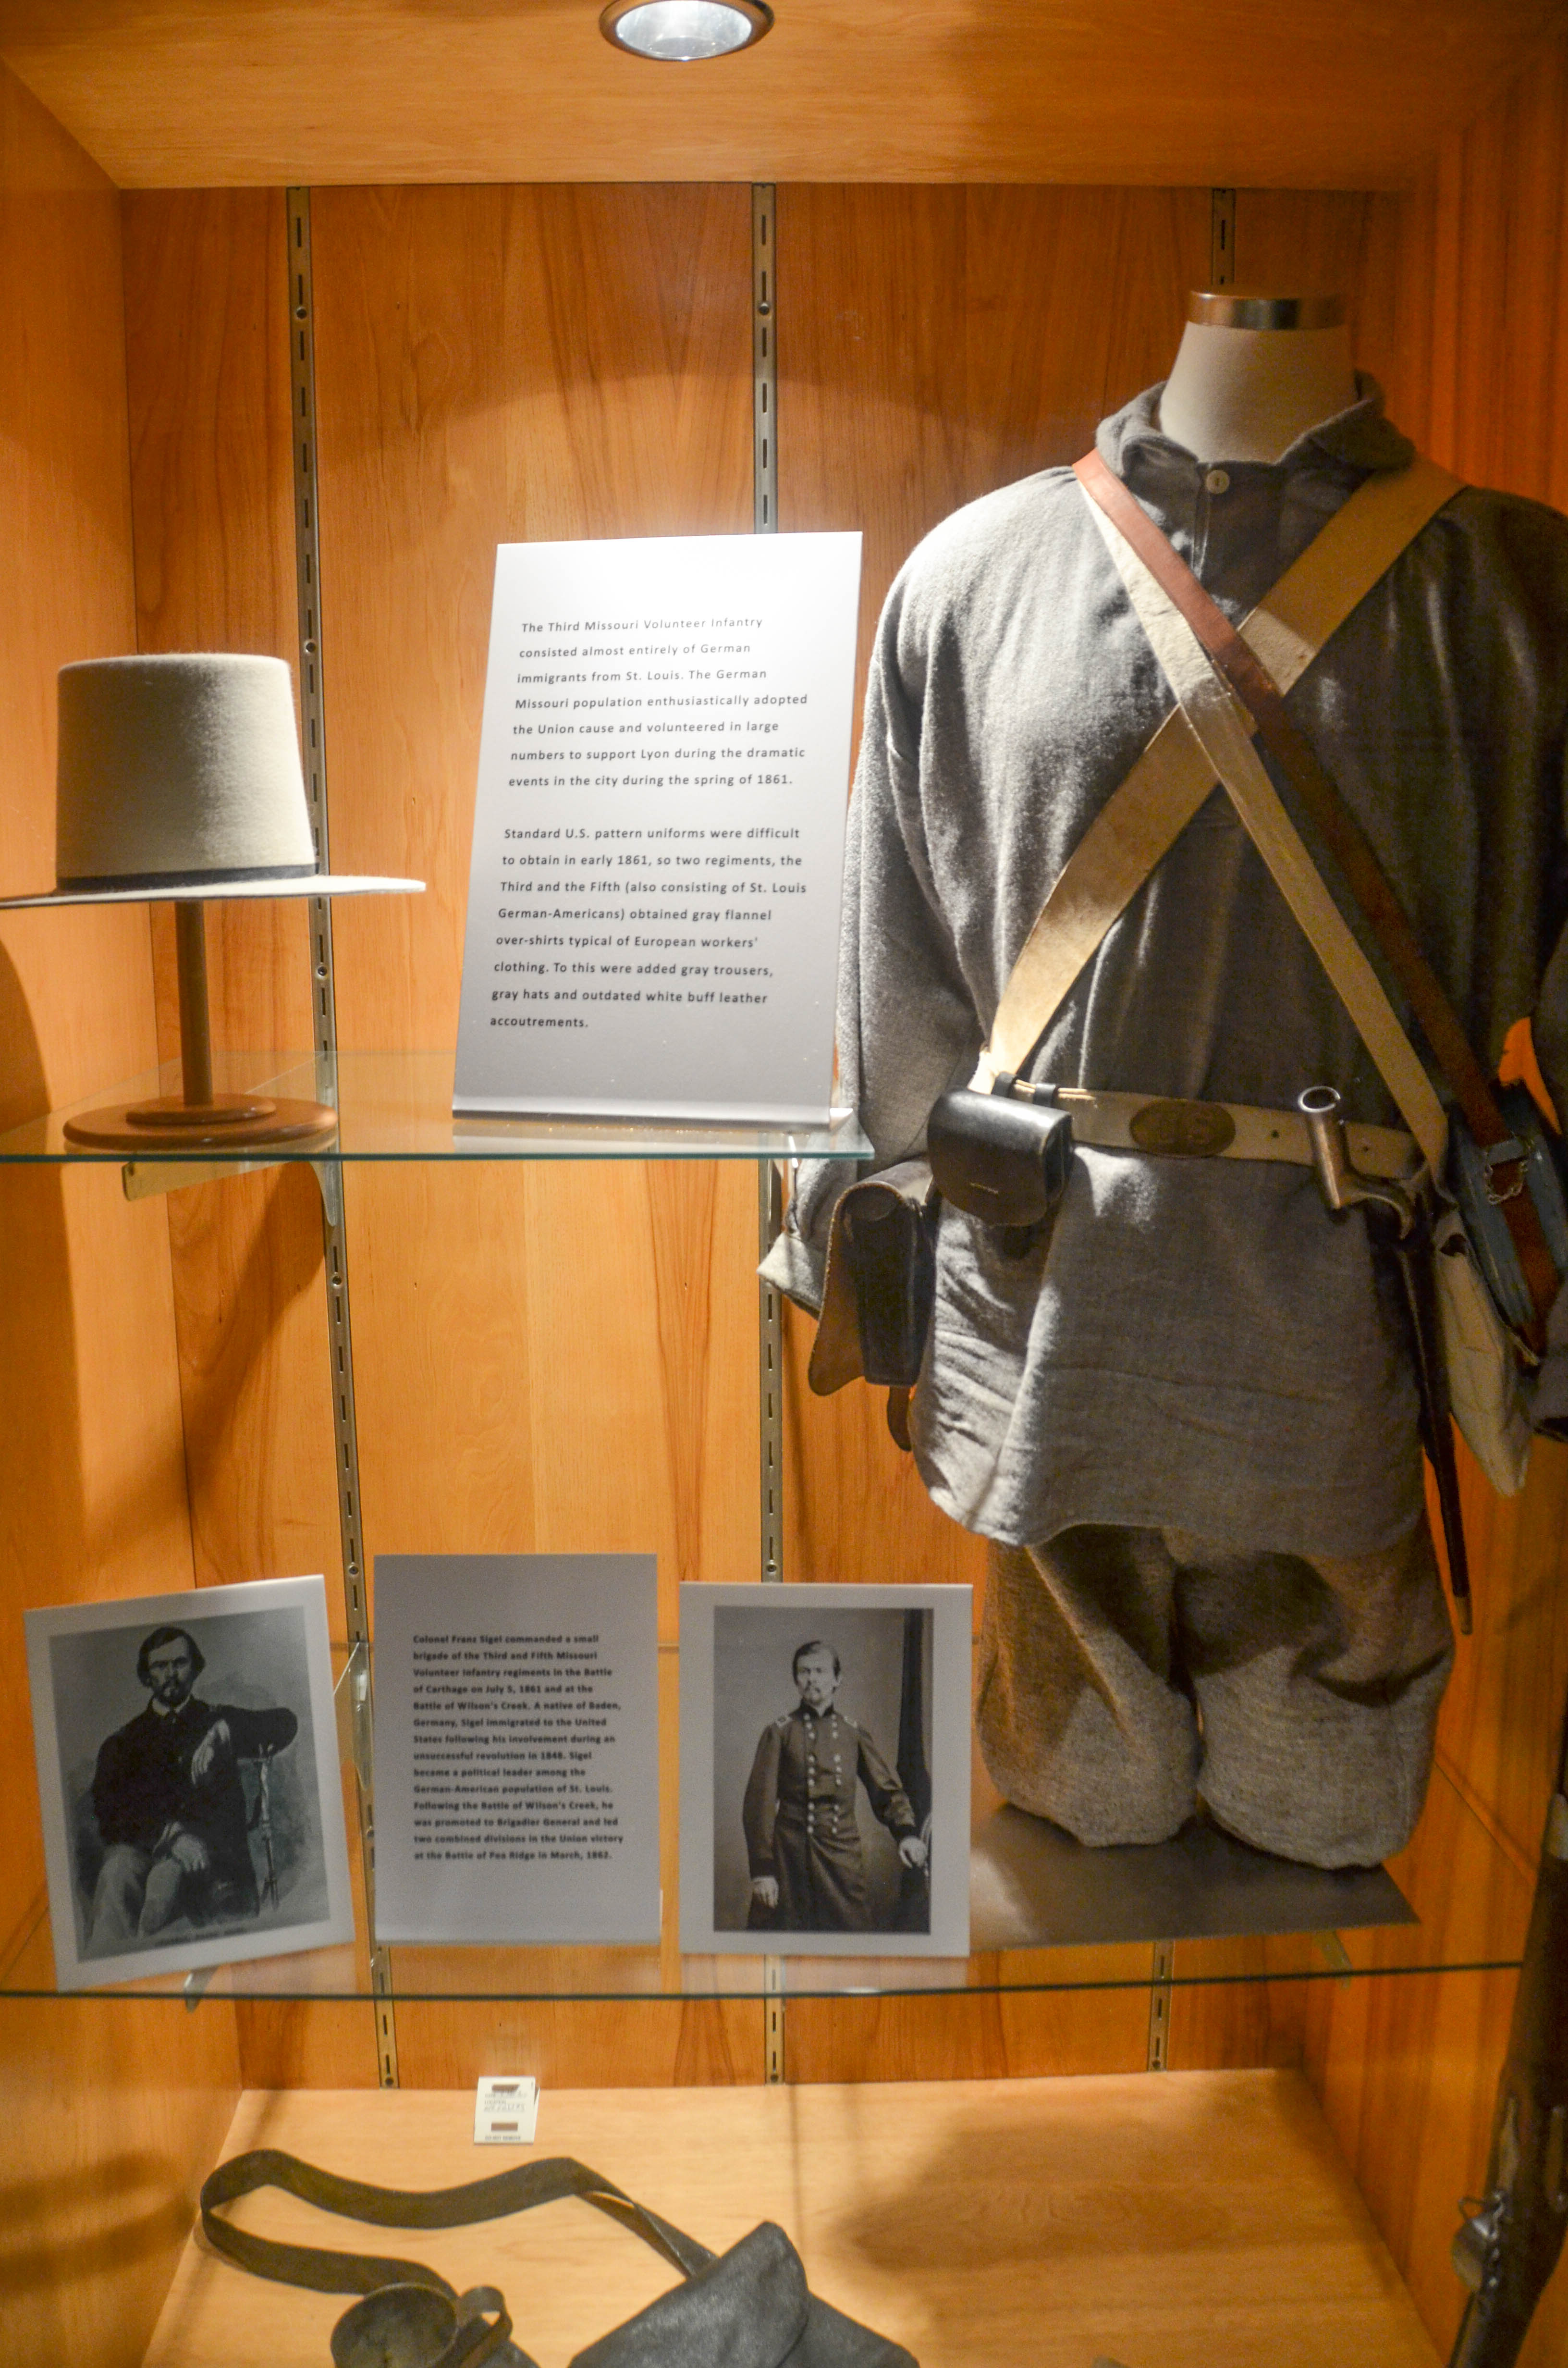 General Sturgis's volunteer army for the Union also wore gray.